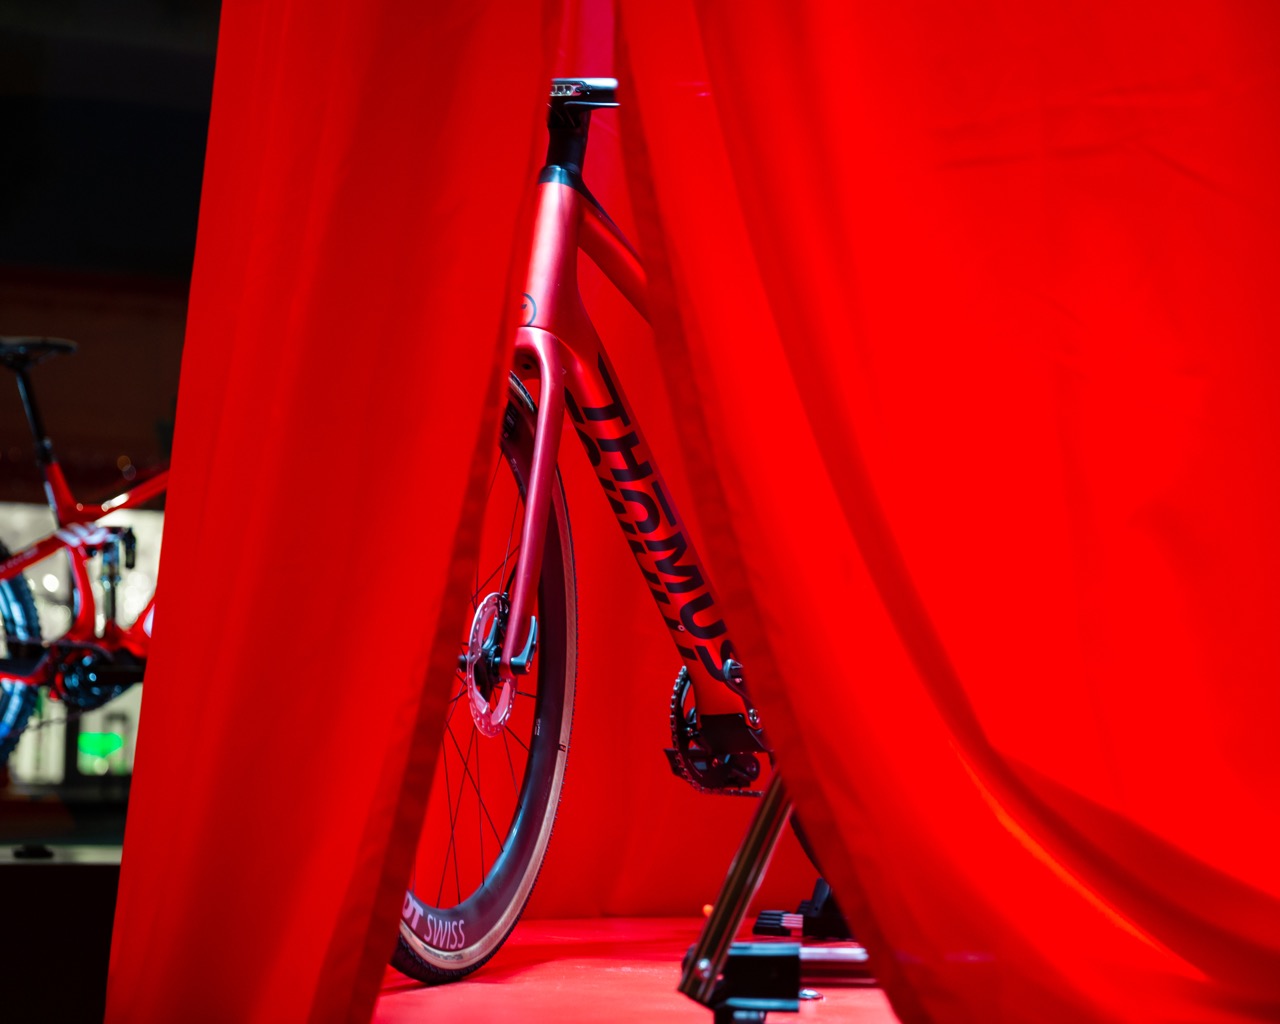 The “World’s Lightest eBike?” The New Thōmus Swissrider weighs just 25 lbs!